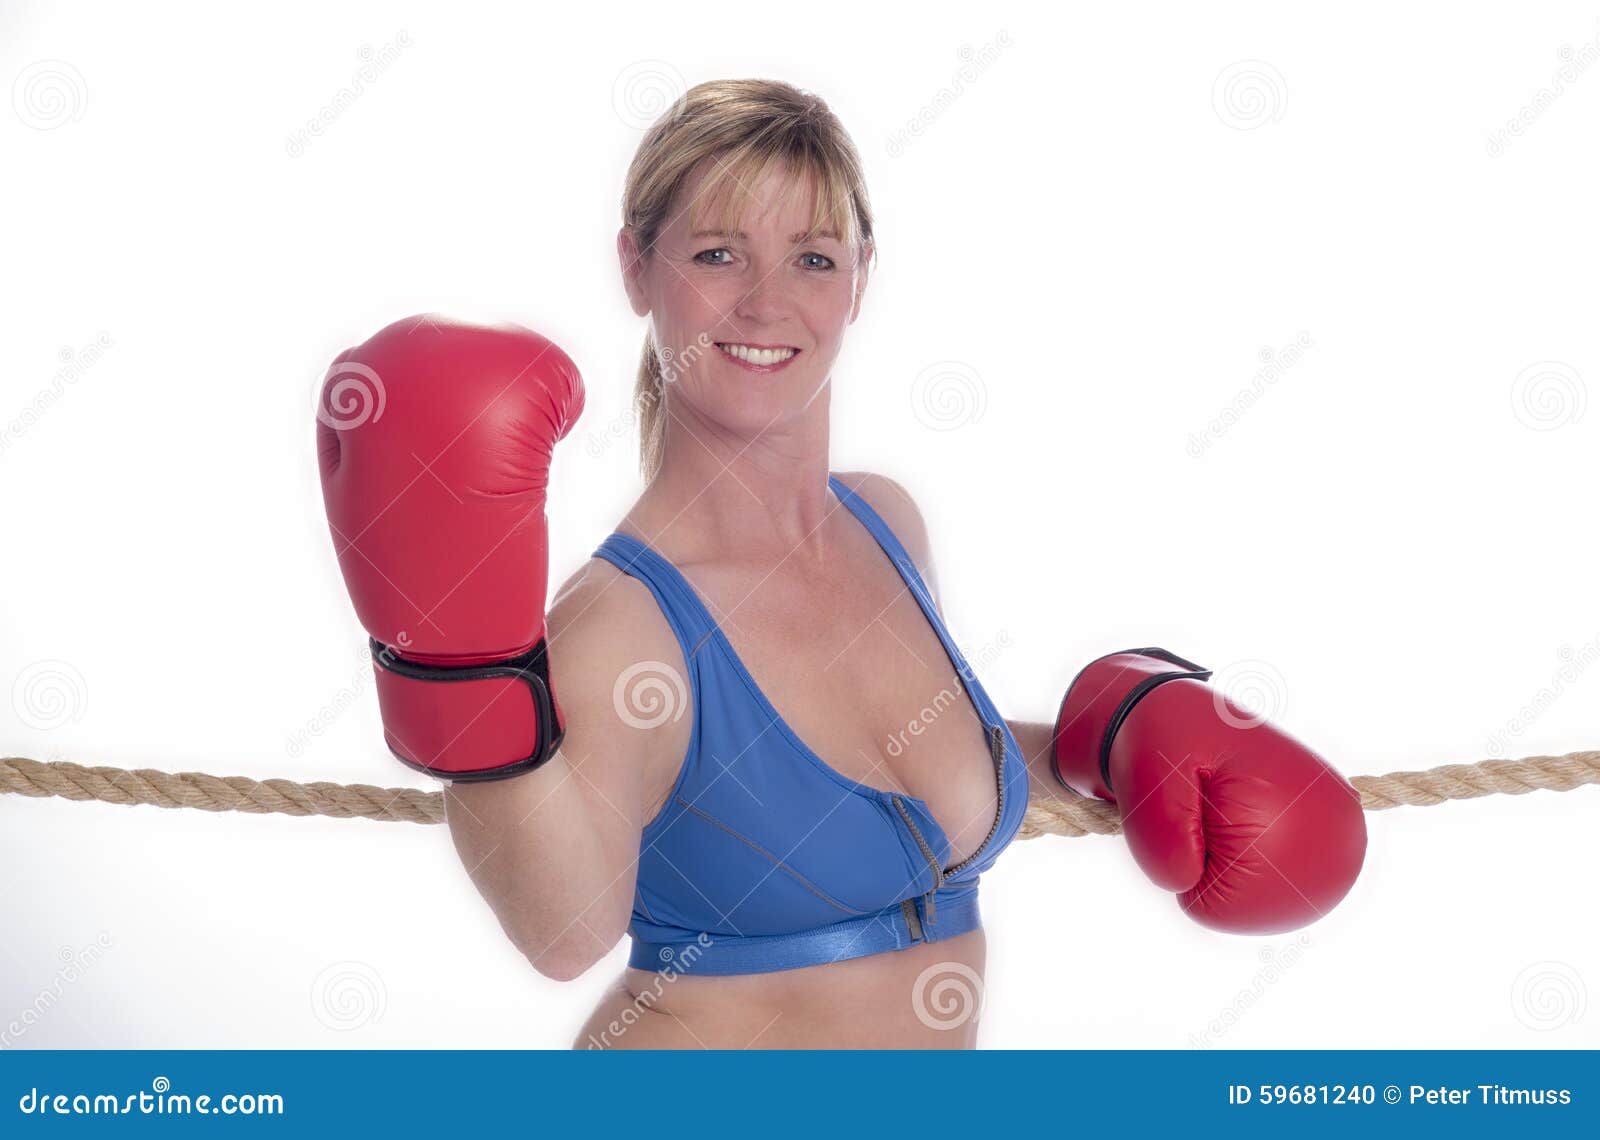 Placeit - Sports Bra Mockup of a Woman Wearing Boxing Gloves